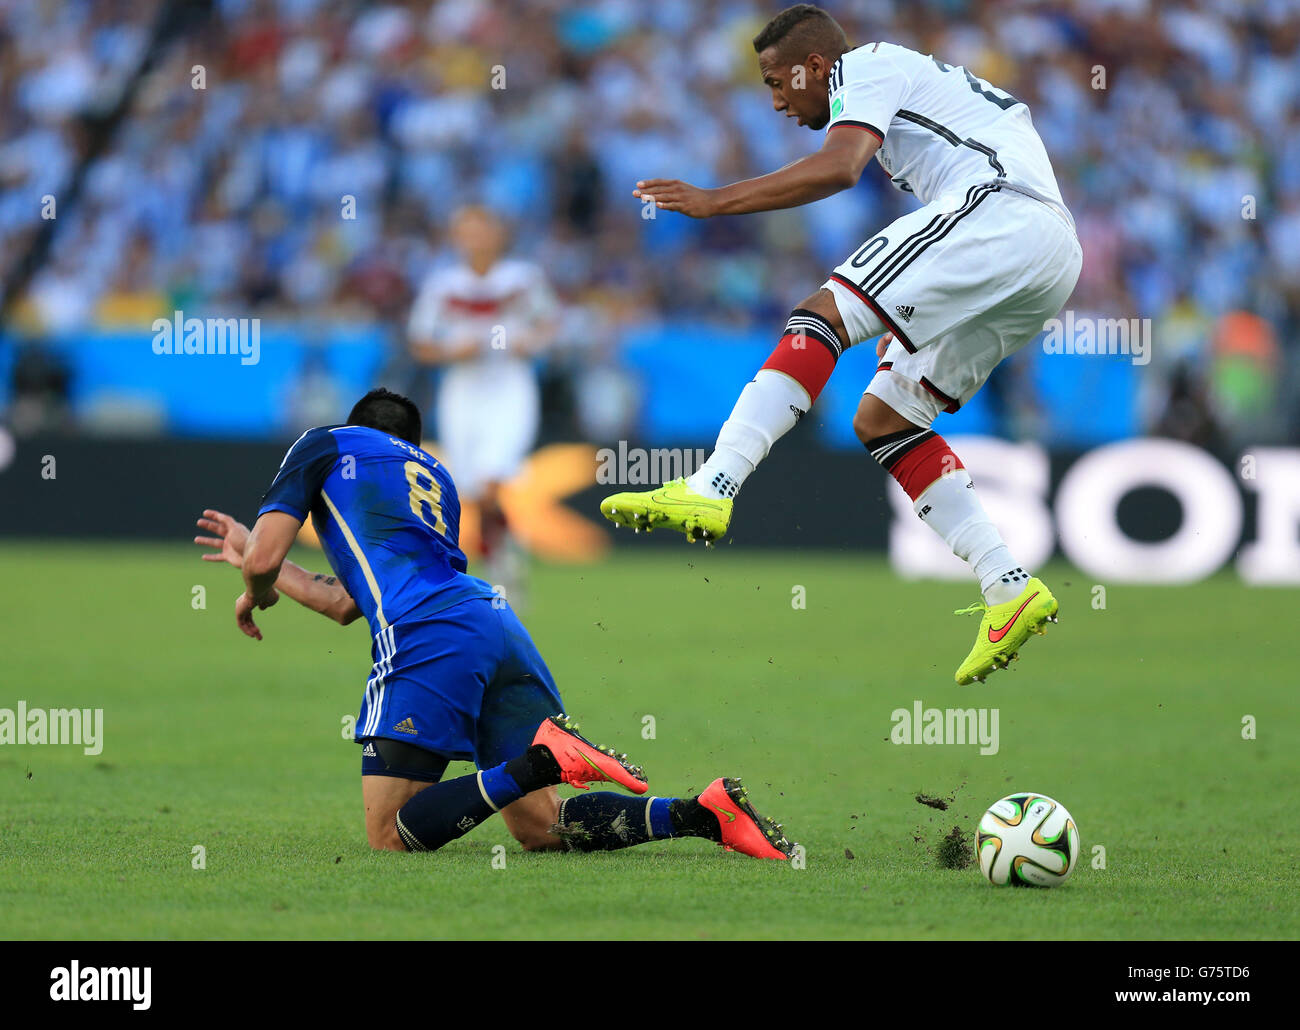 Argentina's Enzo Perez battles for the ball with Germany's Jerome Boateng during the FIFA World Cup Final at the Estadio do Maracana, Rio de Janerio, Brazil. Stock Photo